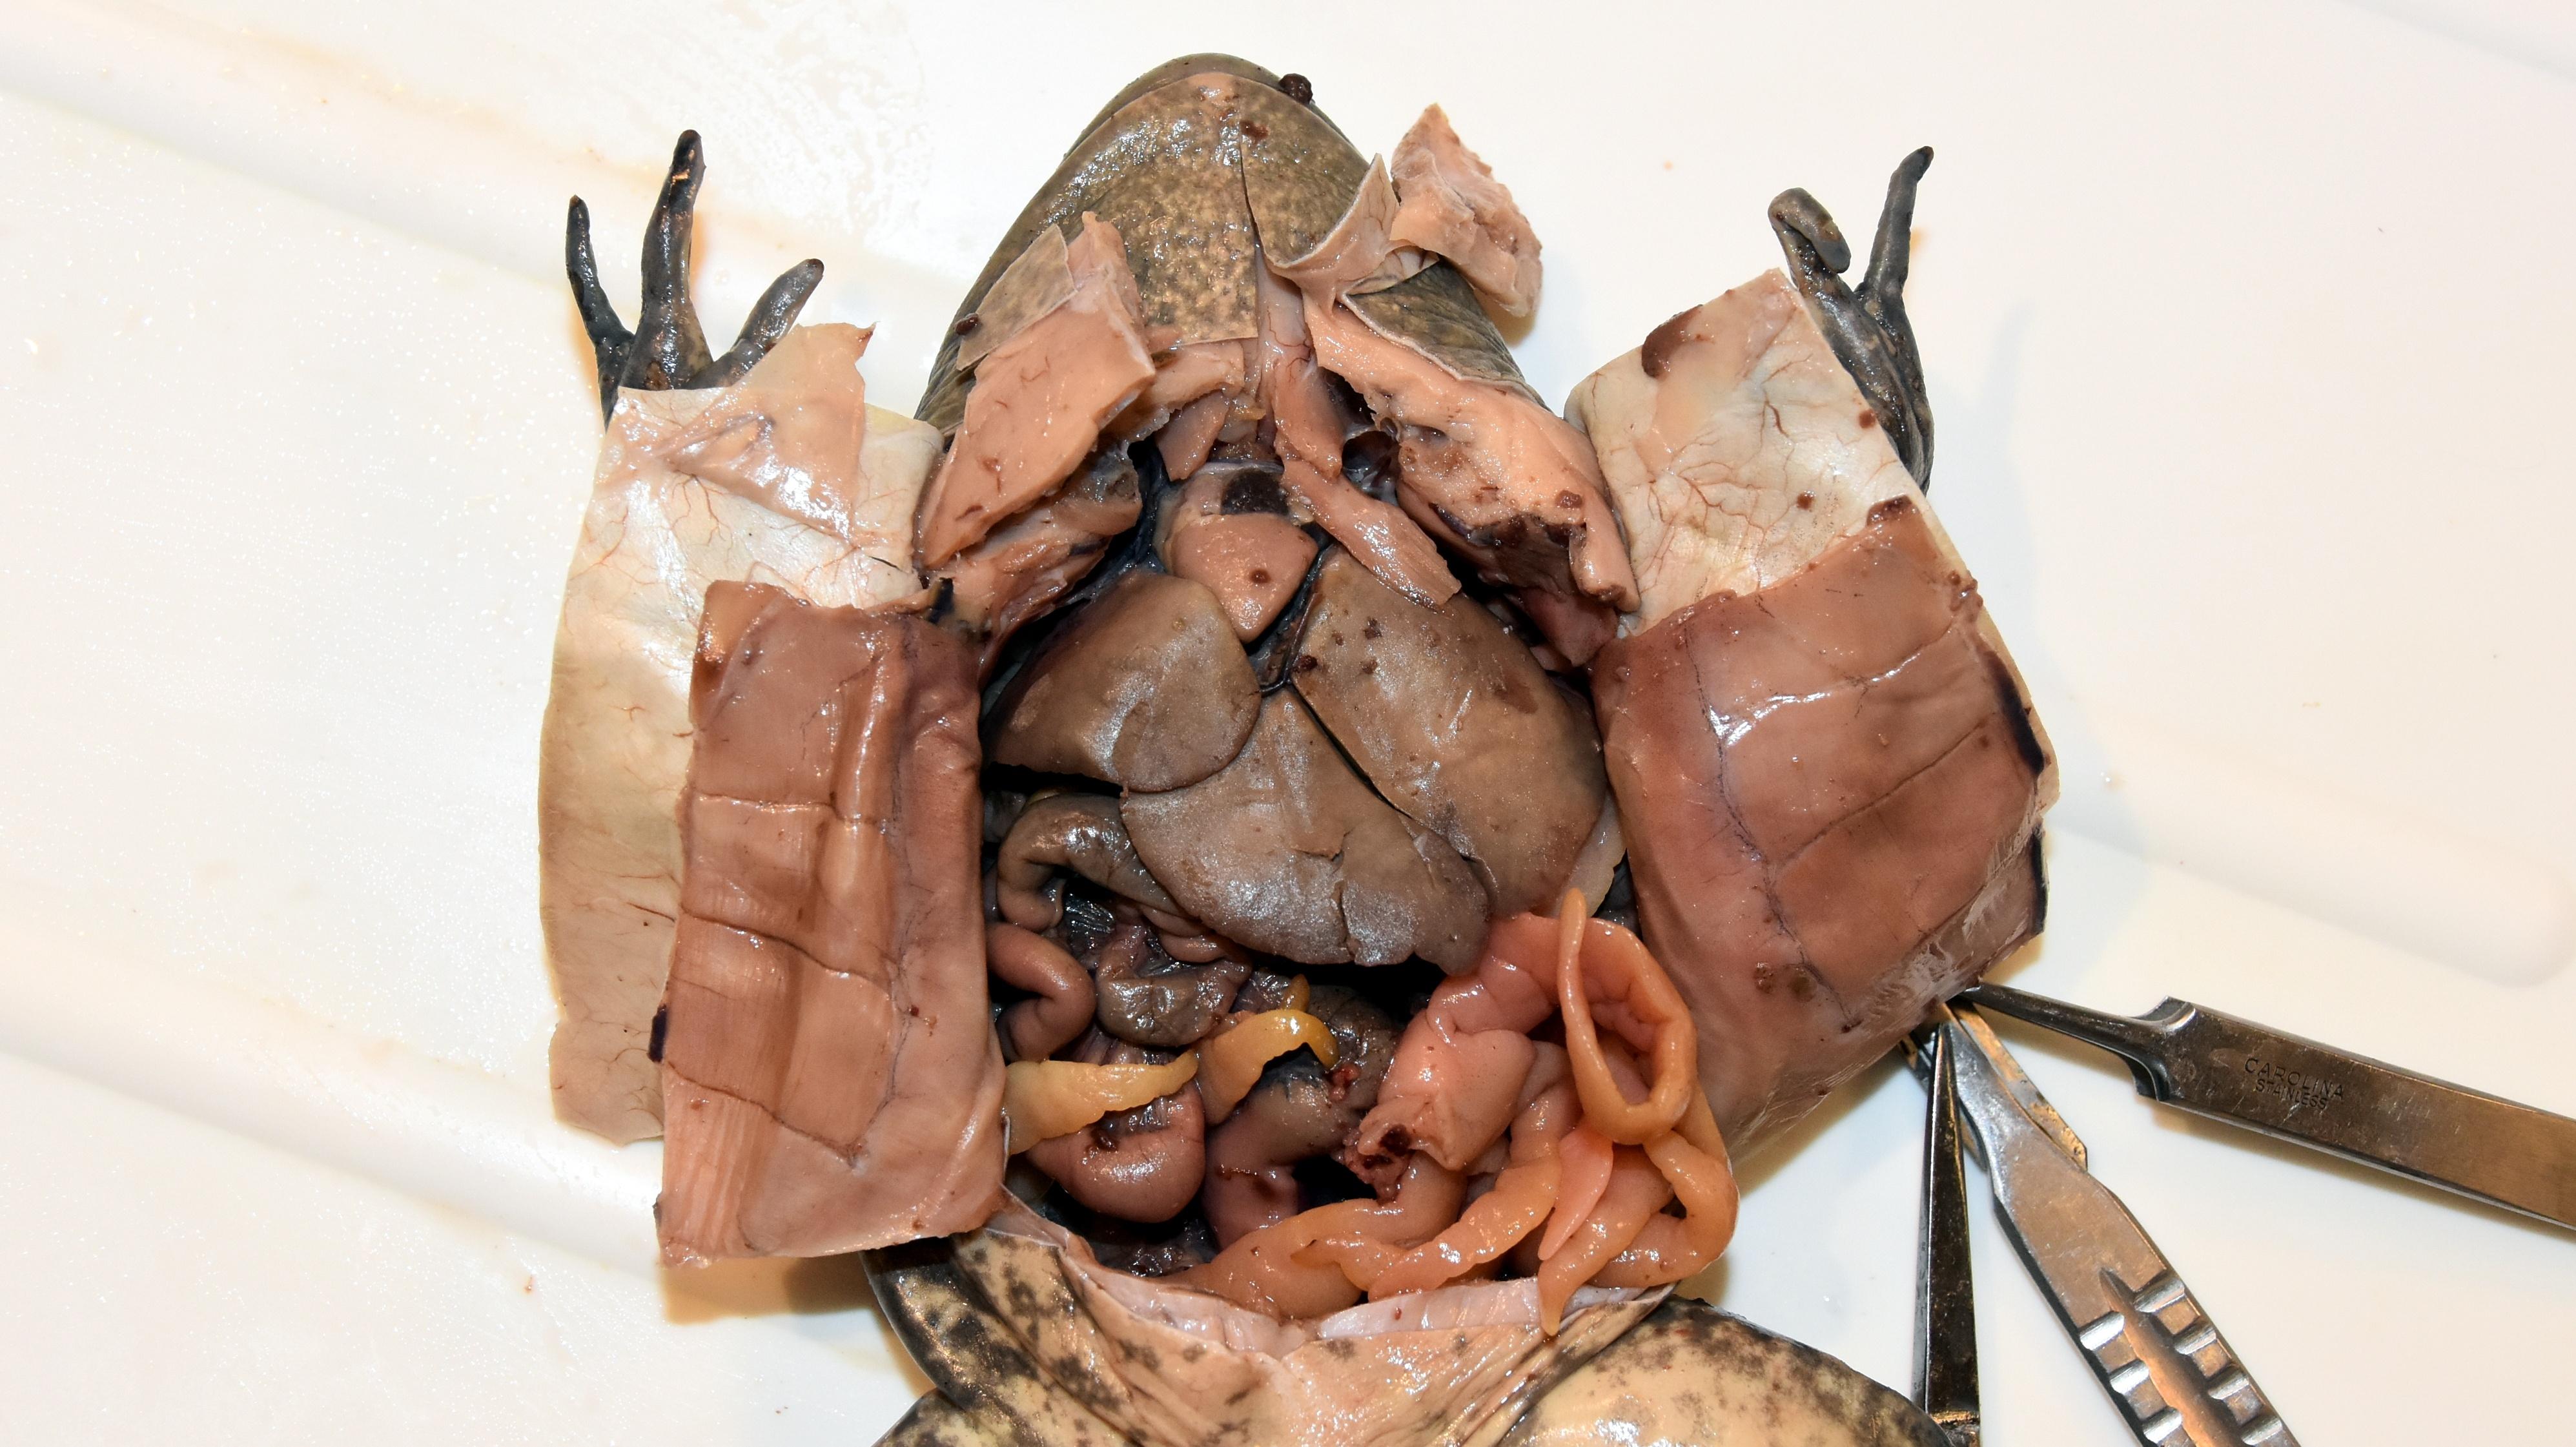 Internal frog dissection